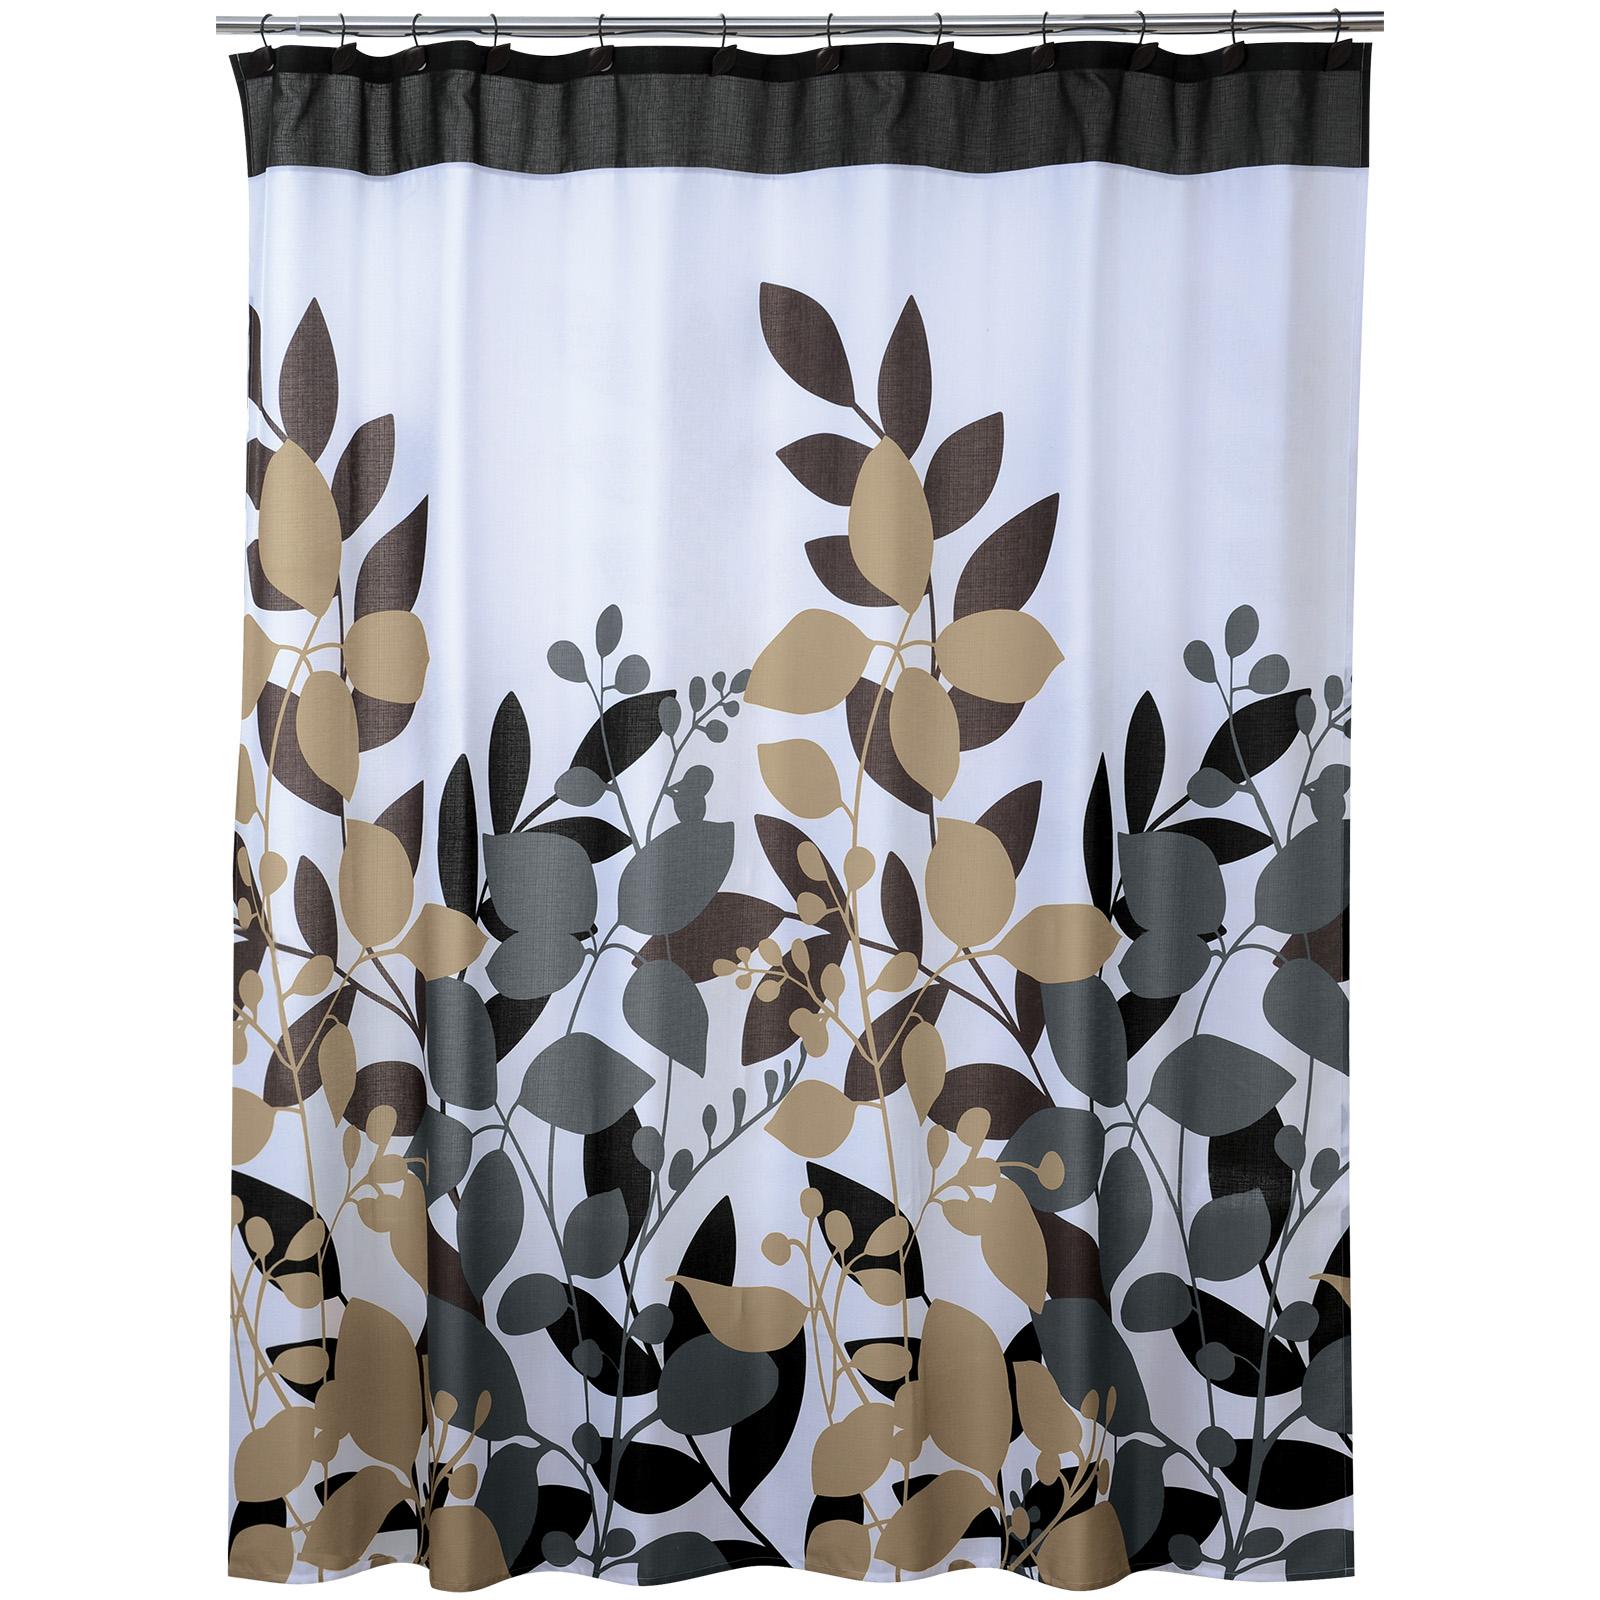 Cannon Shower Curtain - Leafing